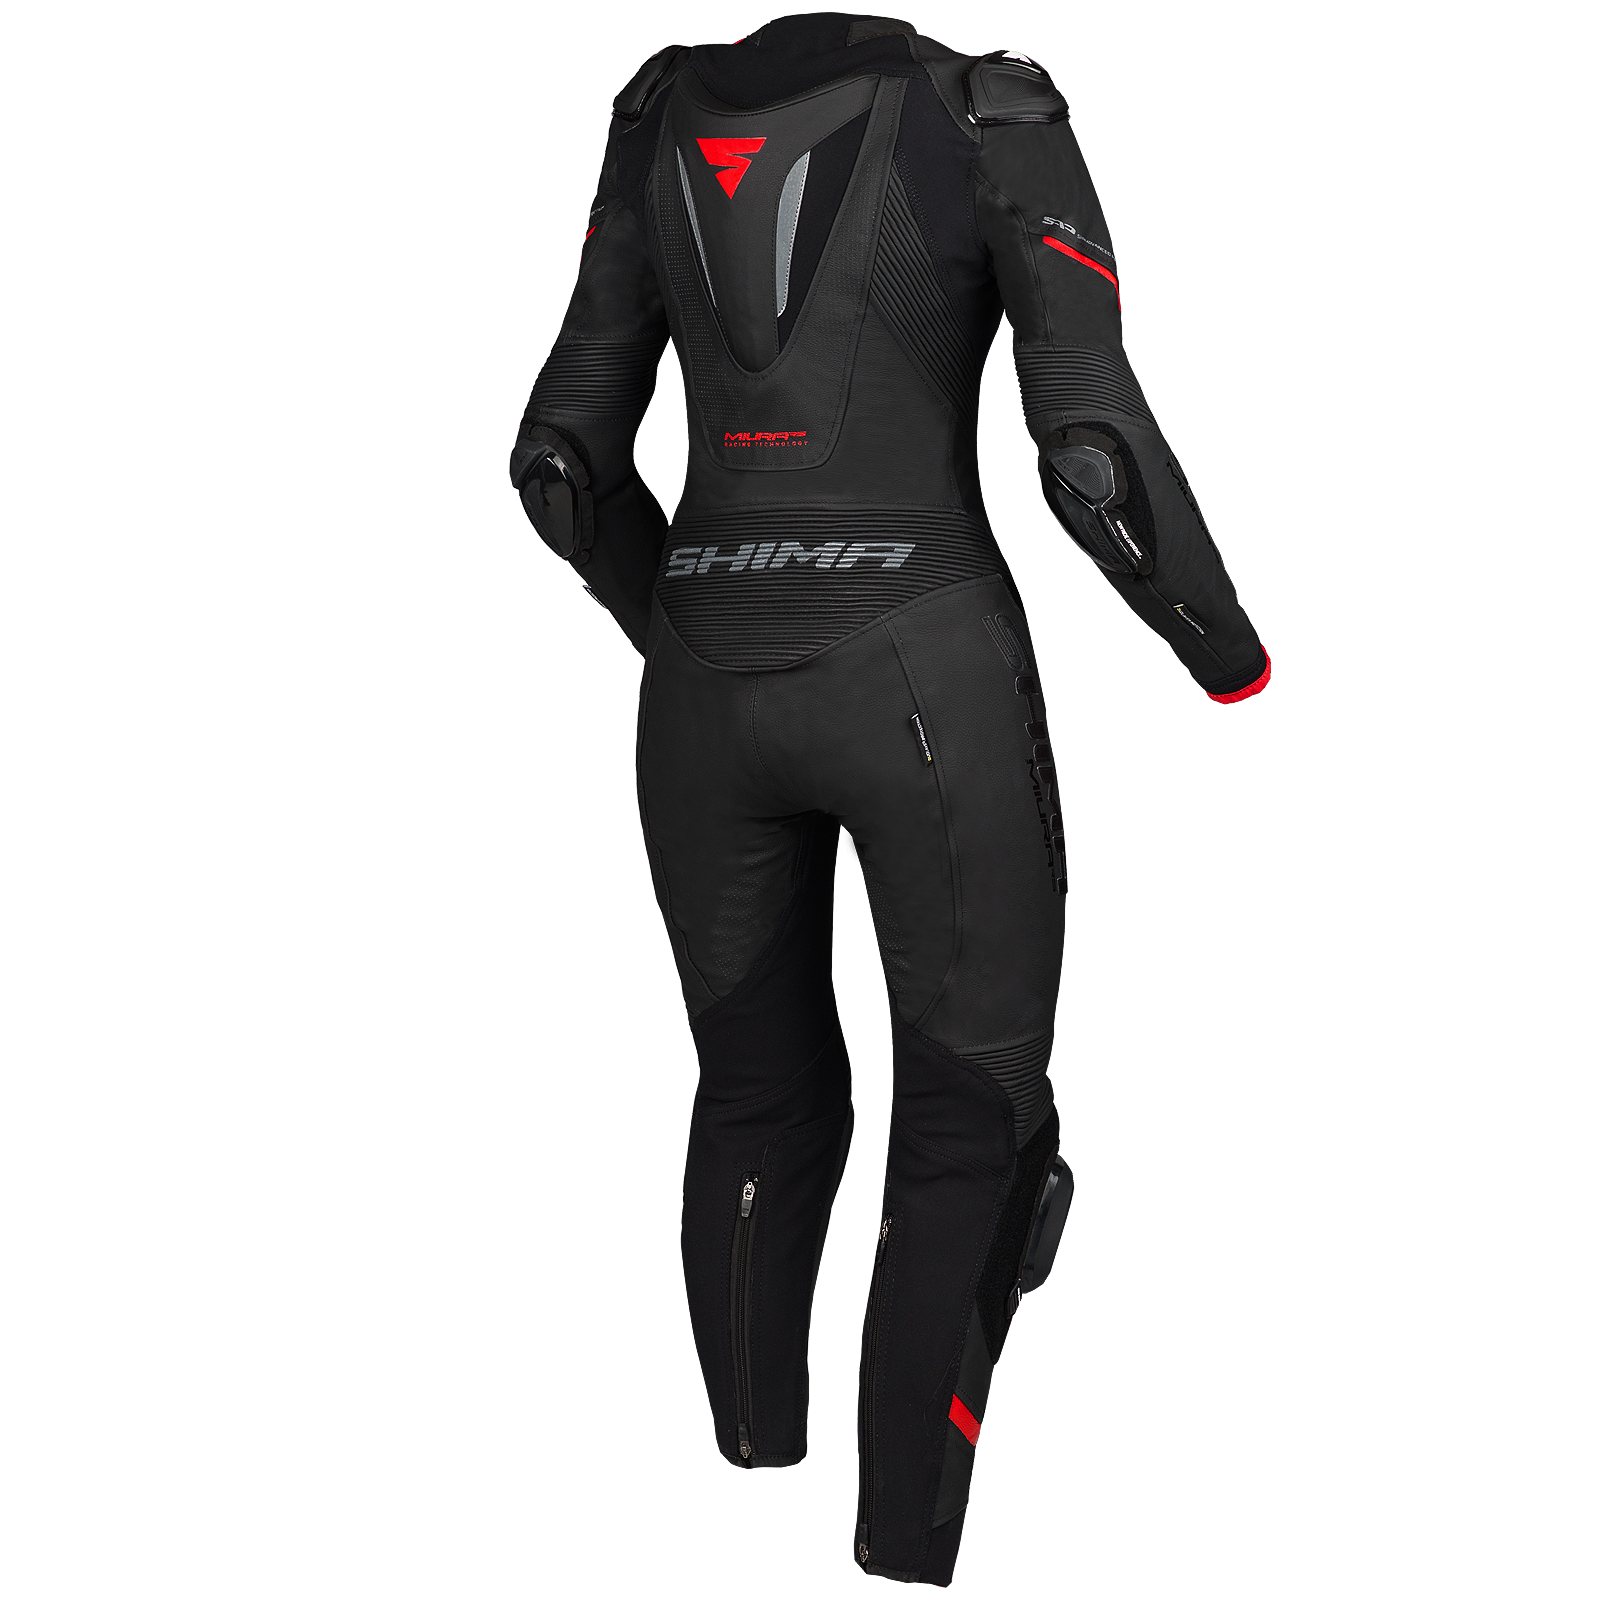 Black and red women's motorcycle racing suit from Shima from the back